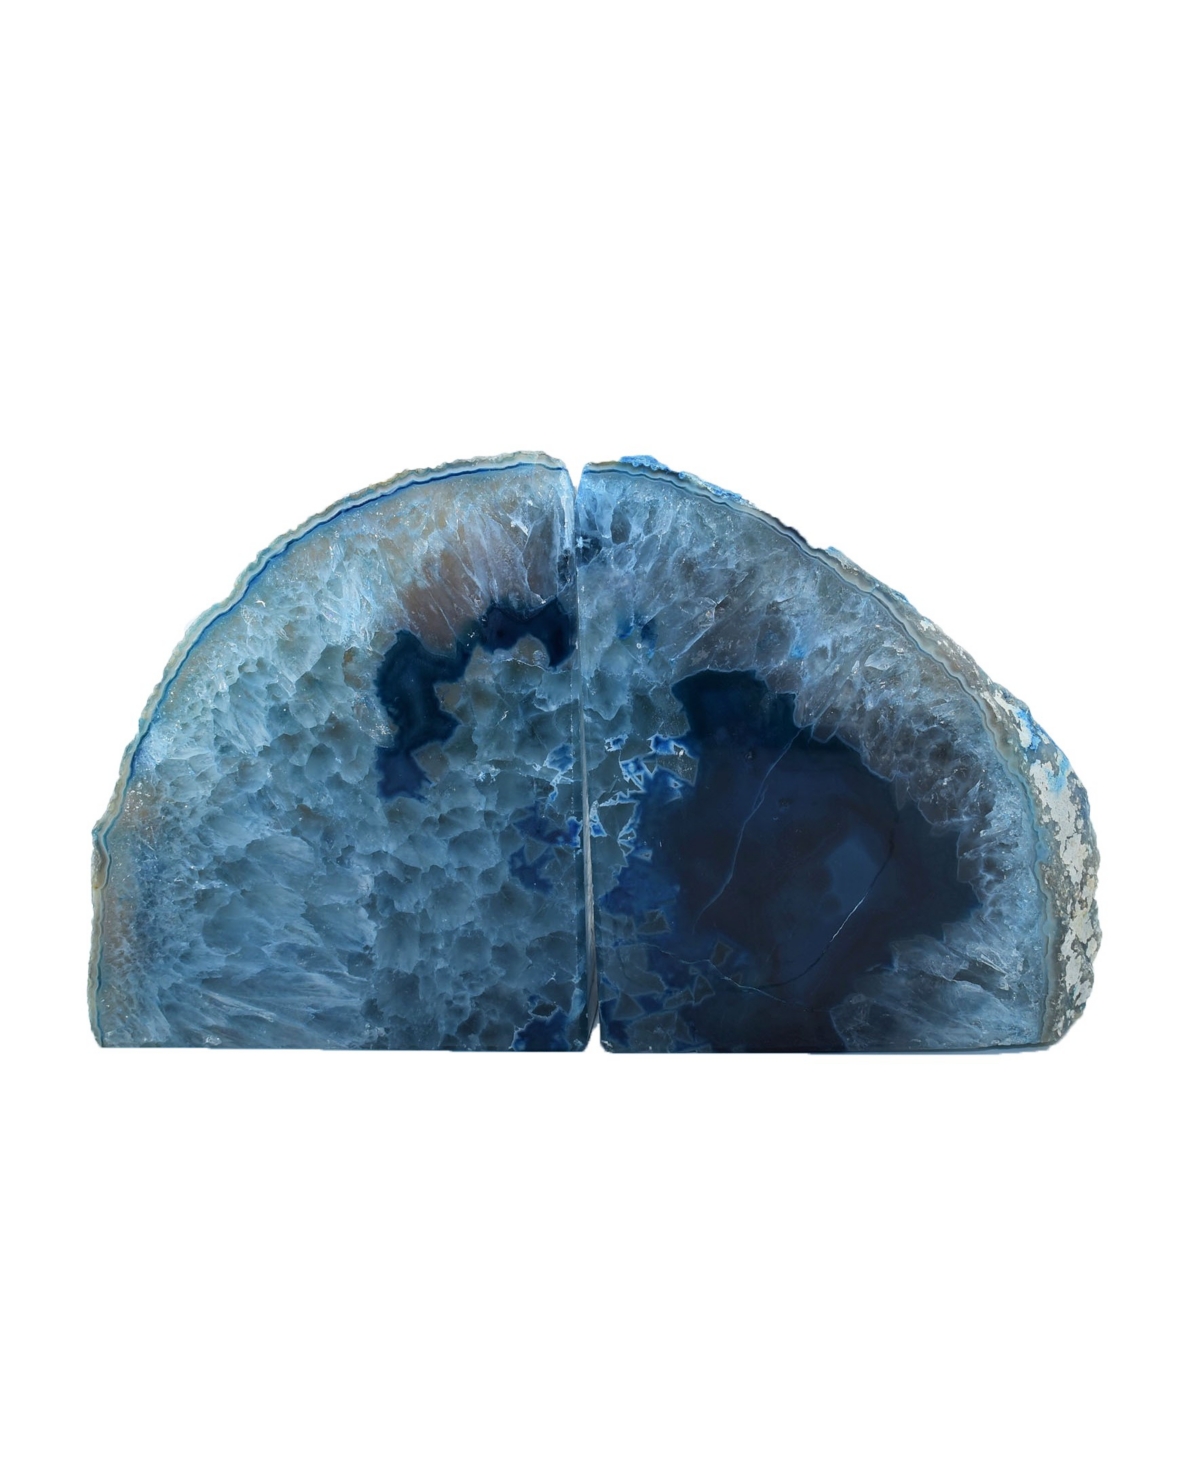 Nature's Decorations - Premium Agate Large Bookends In Blue